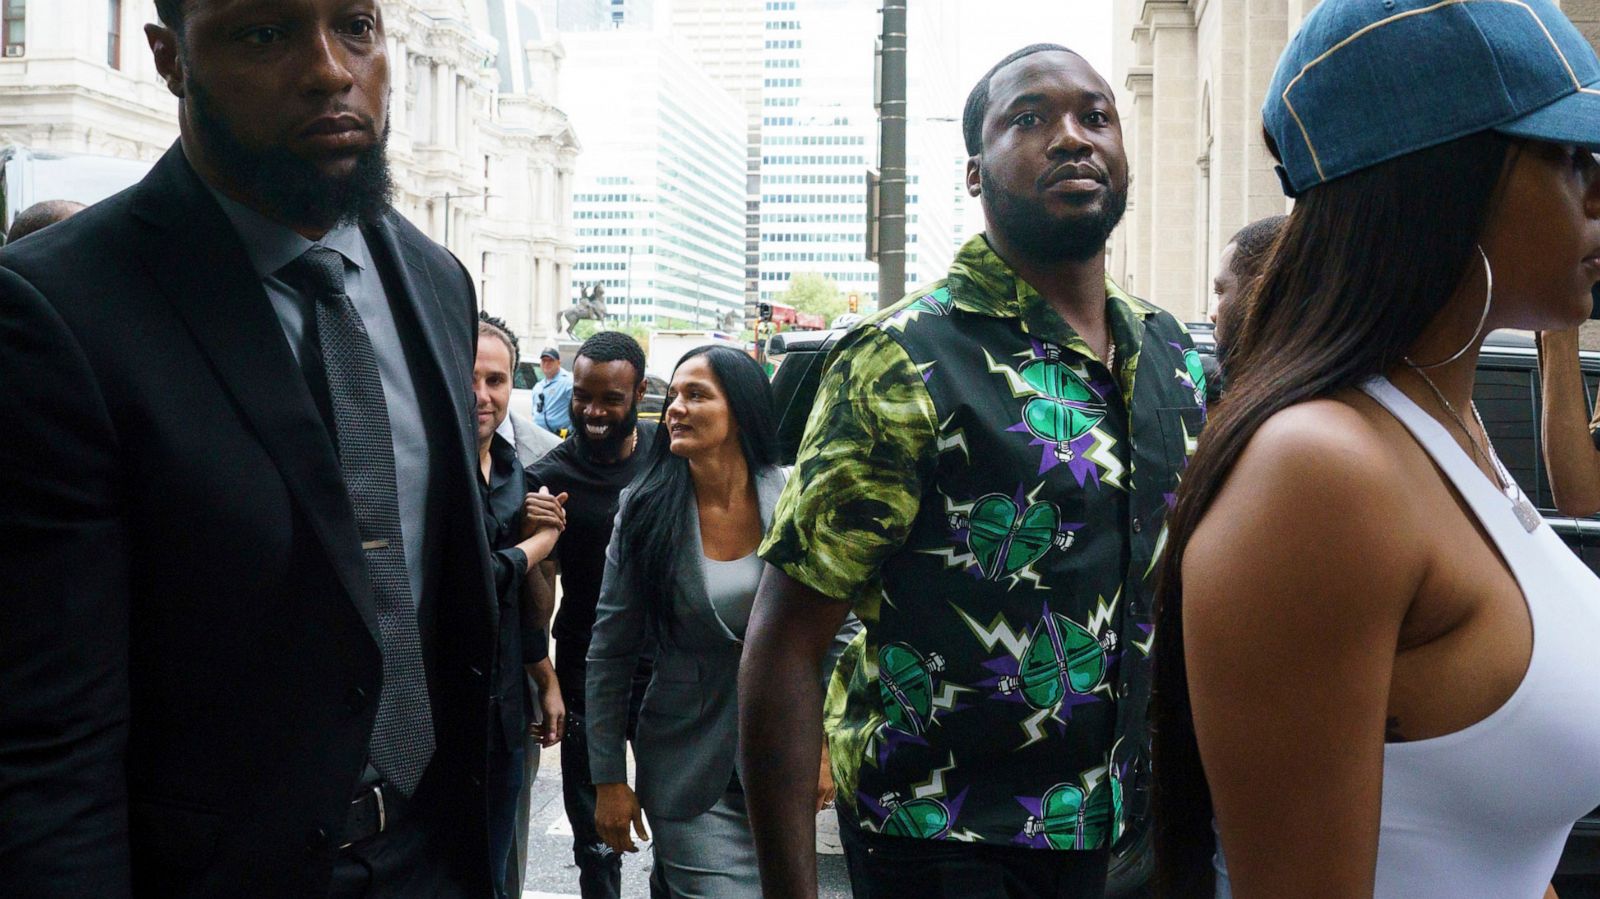 Rapper Meek Mill finally gets his freedom, ending a decade-old legal saga  that sparked a nationwide movement - ABC News